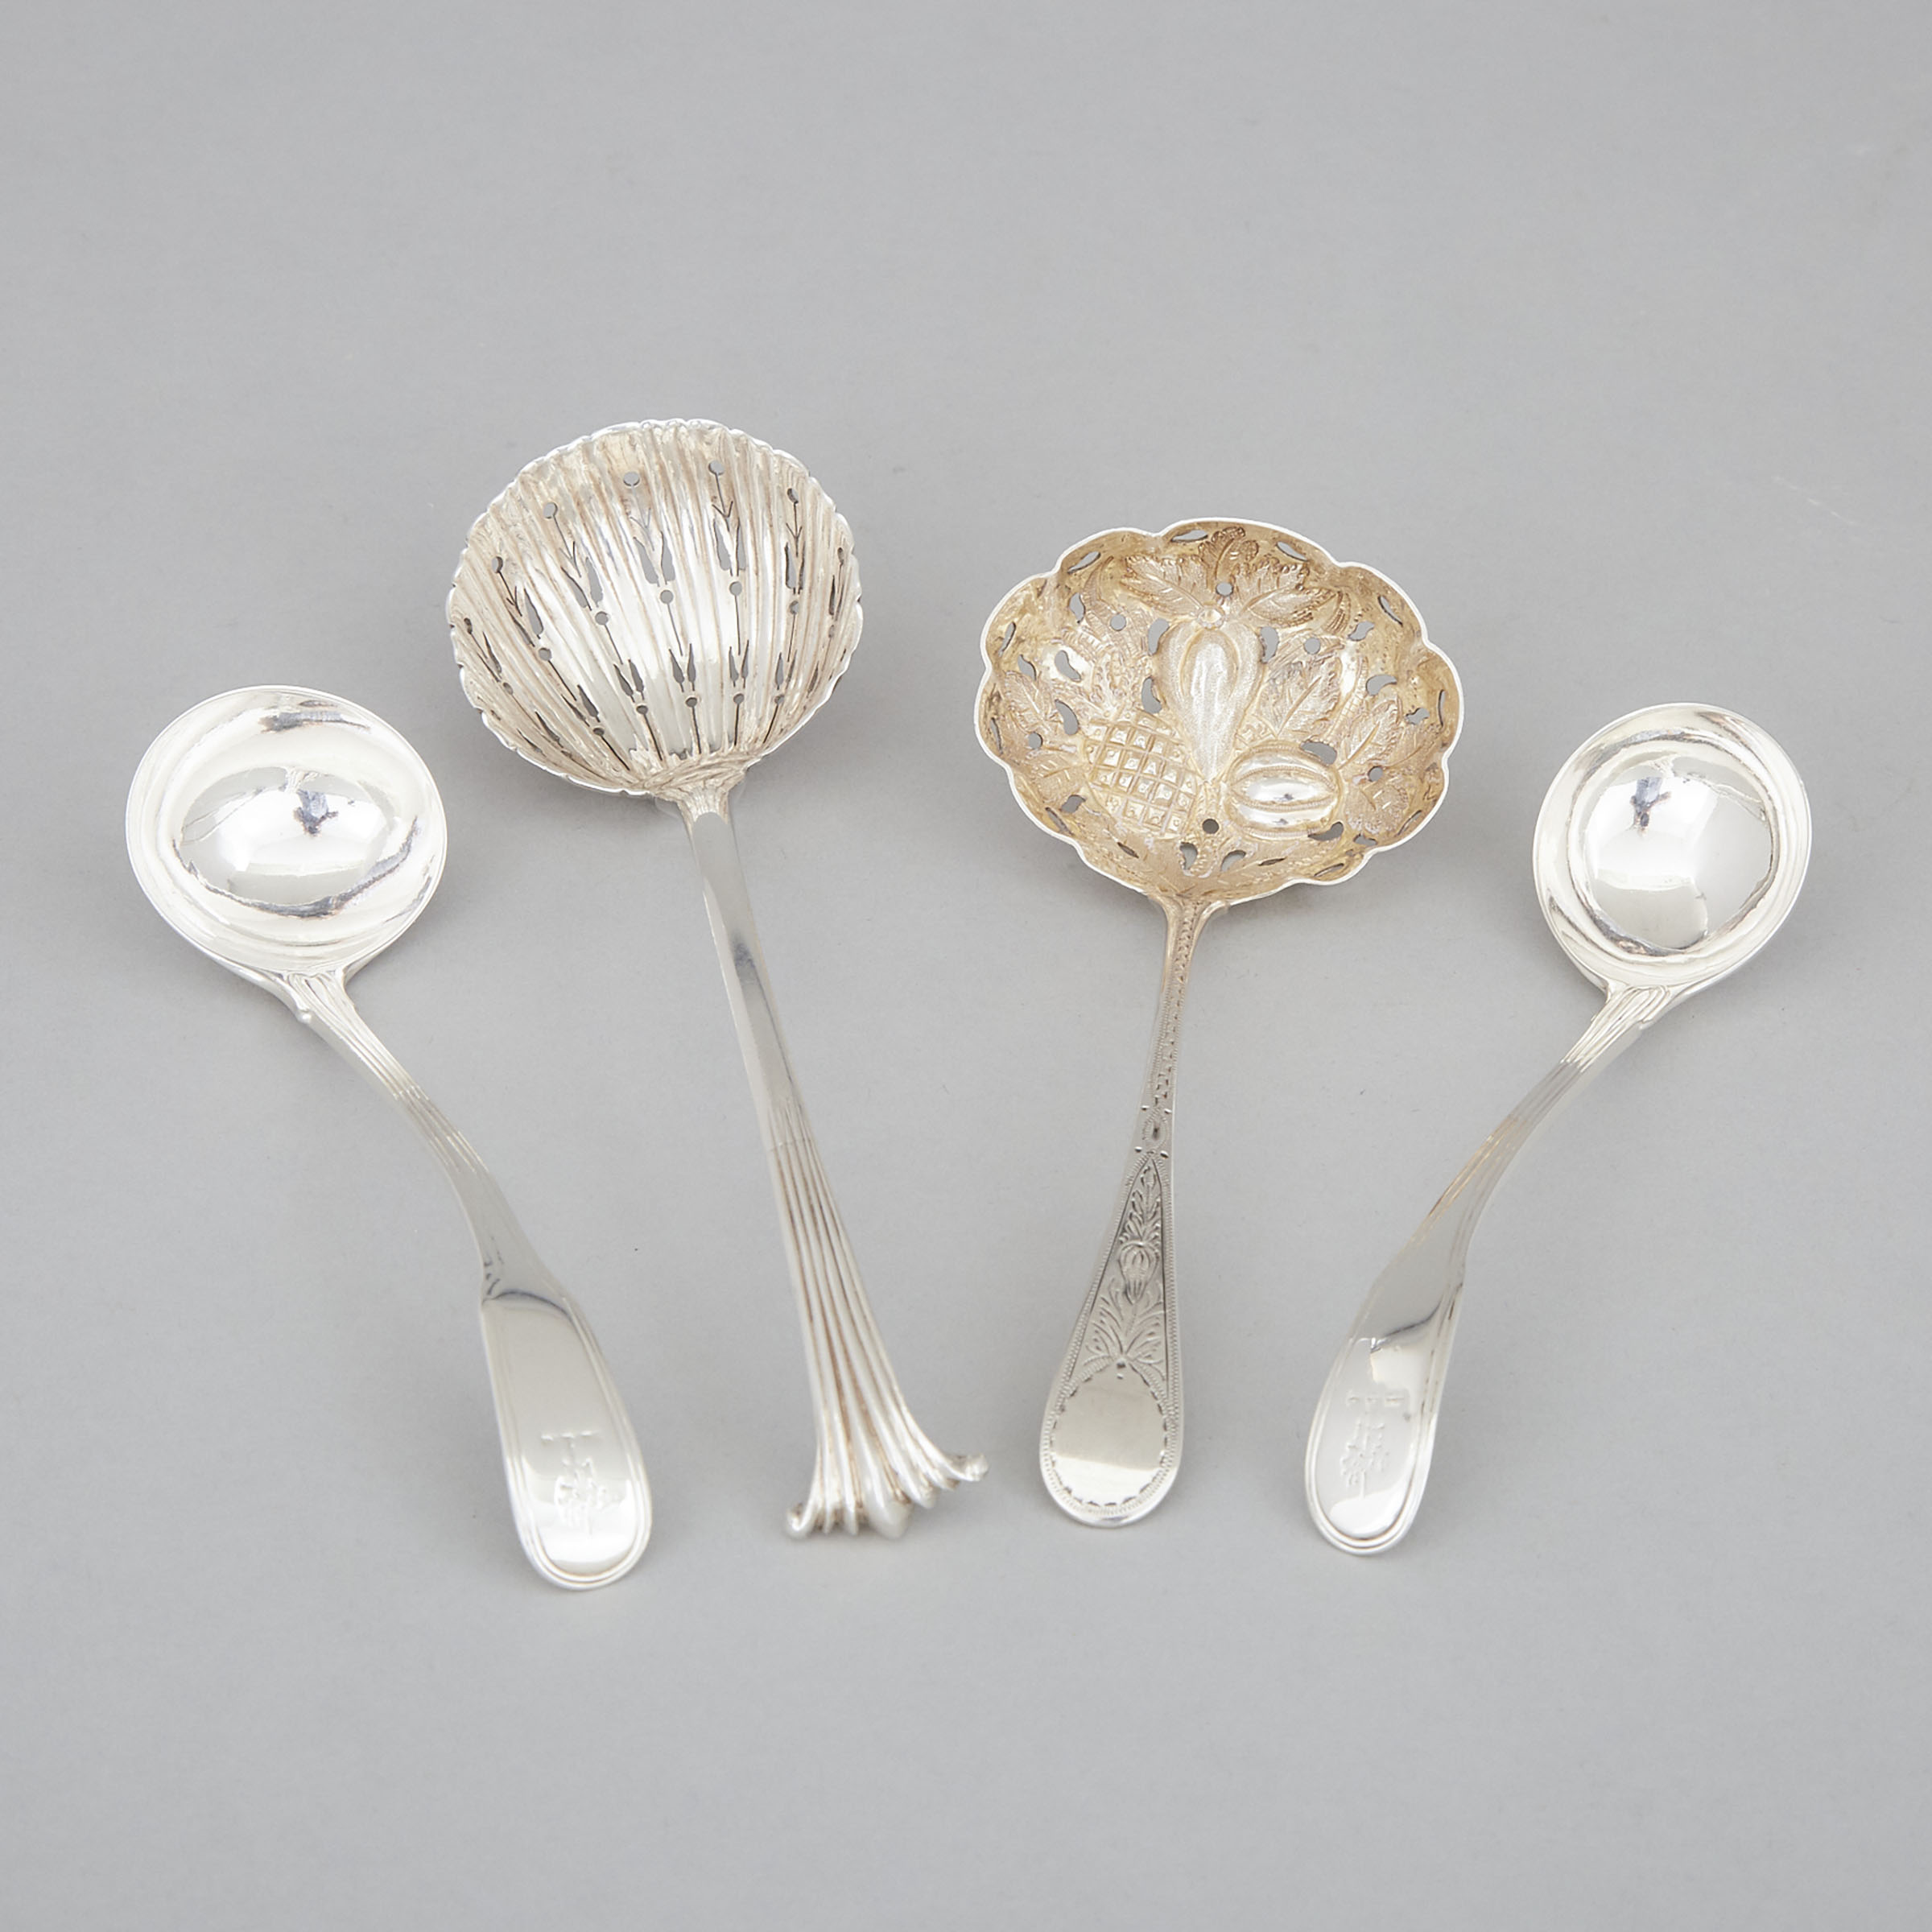 Two George III Silver Sugar Sifting Ladles and Two Sauce Ladles, London, c.1775-1800